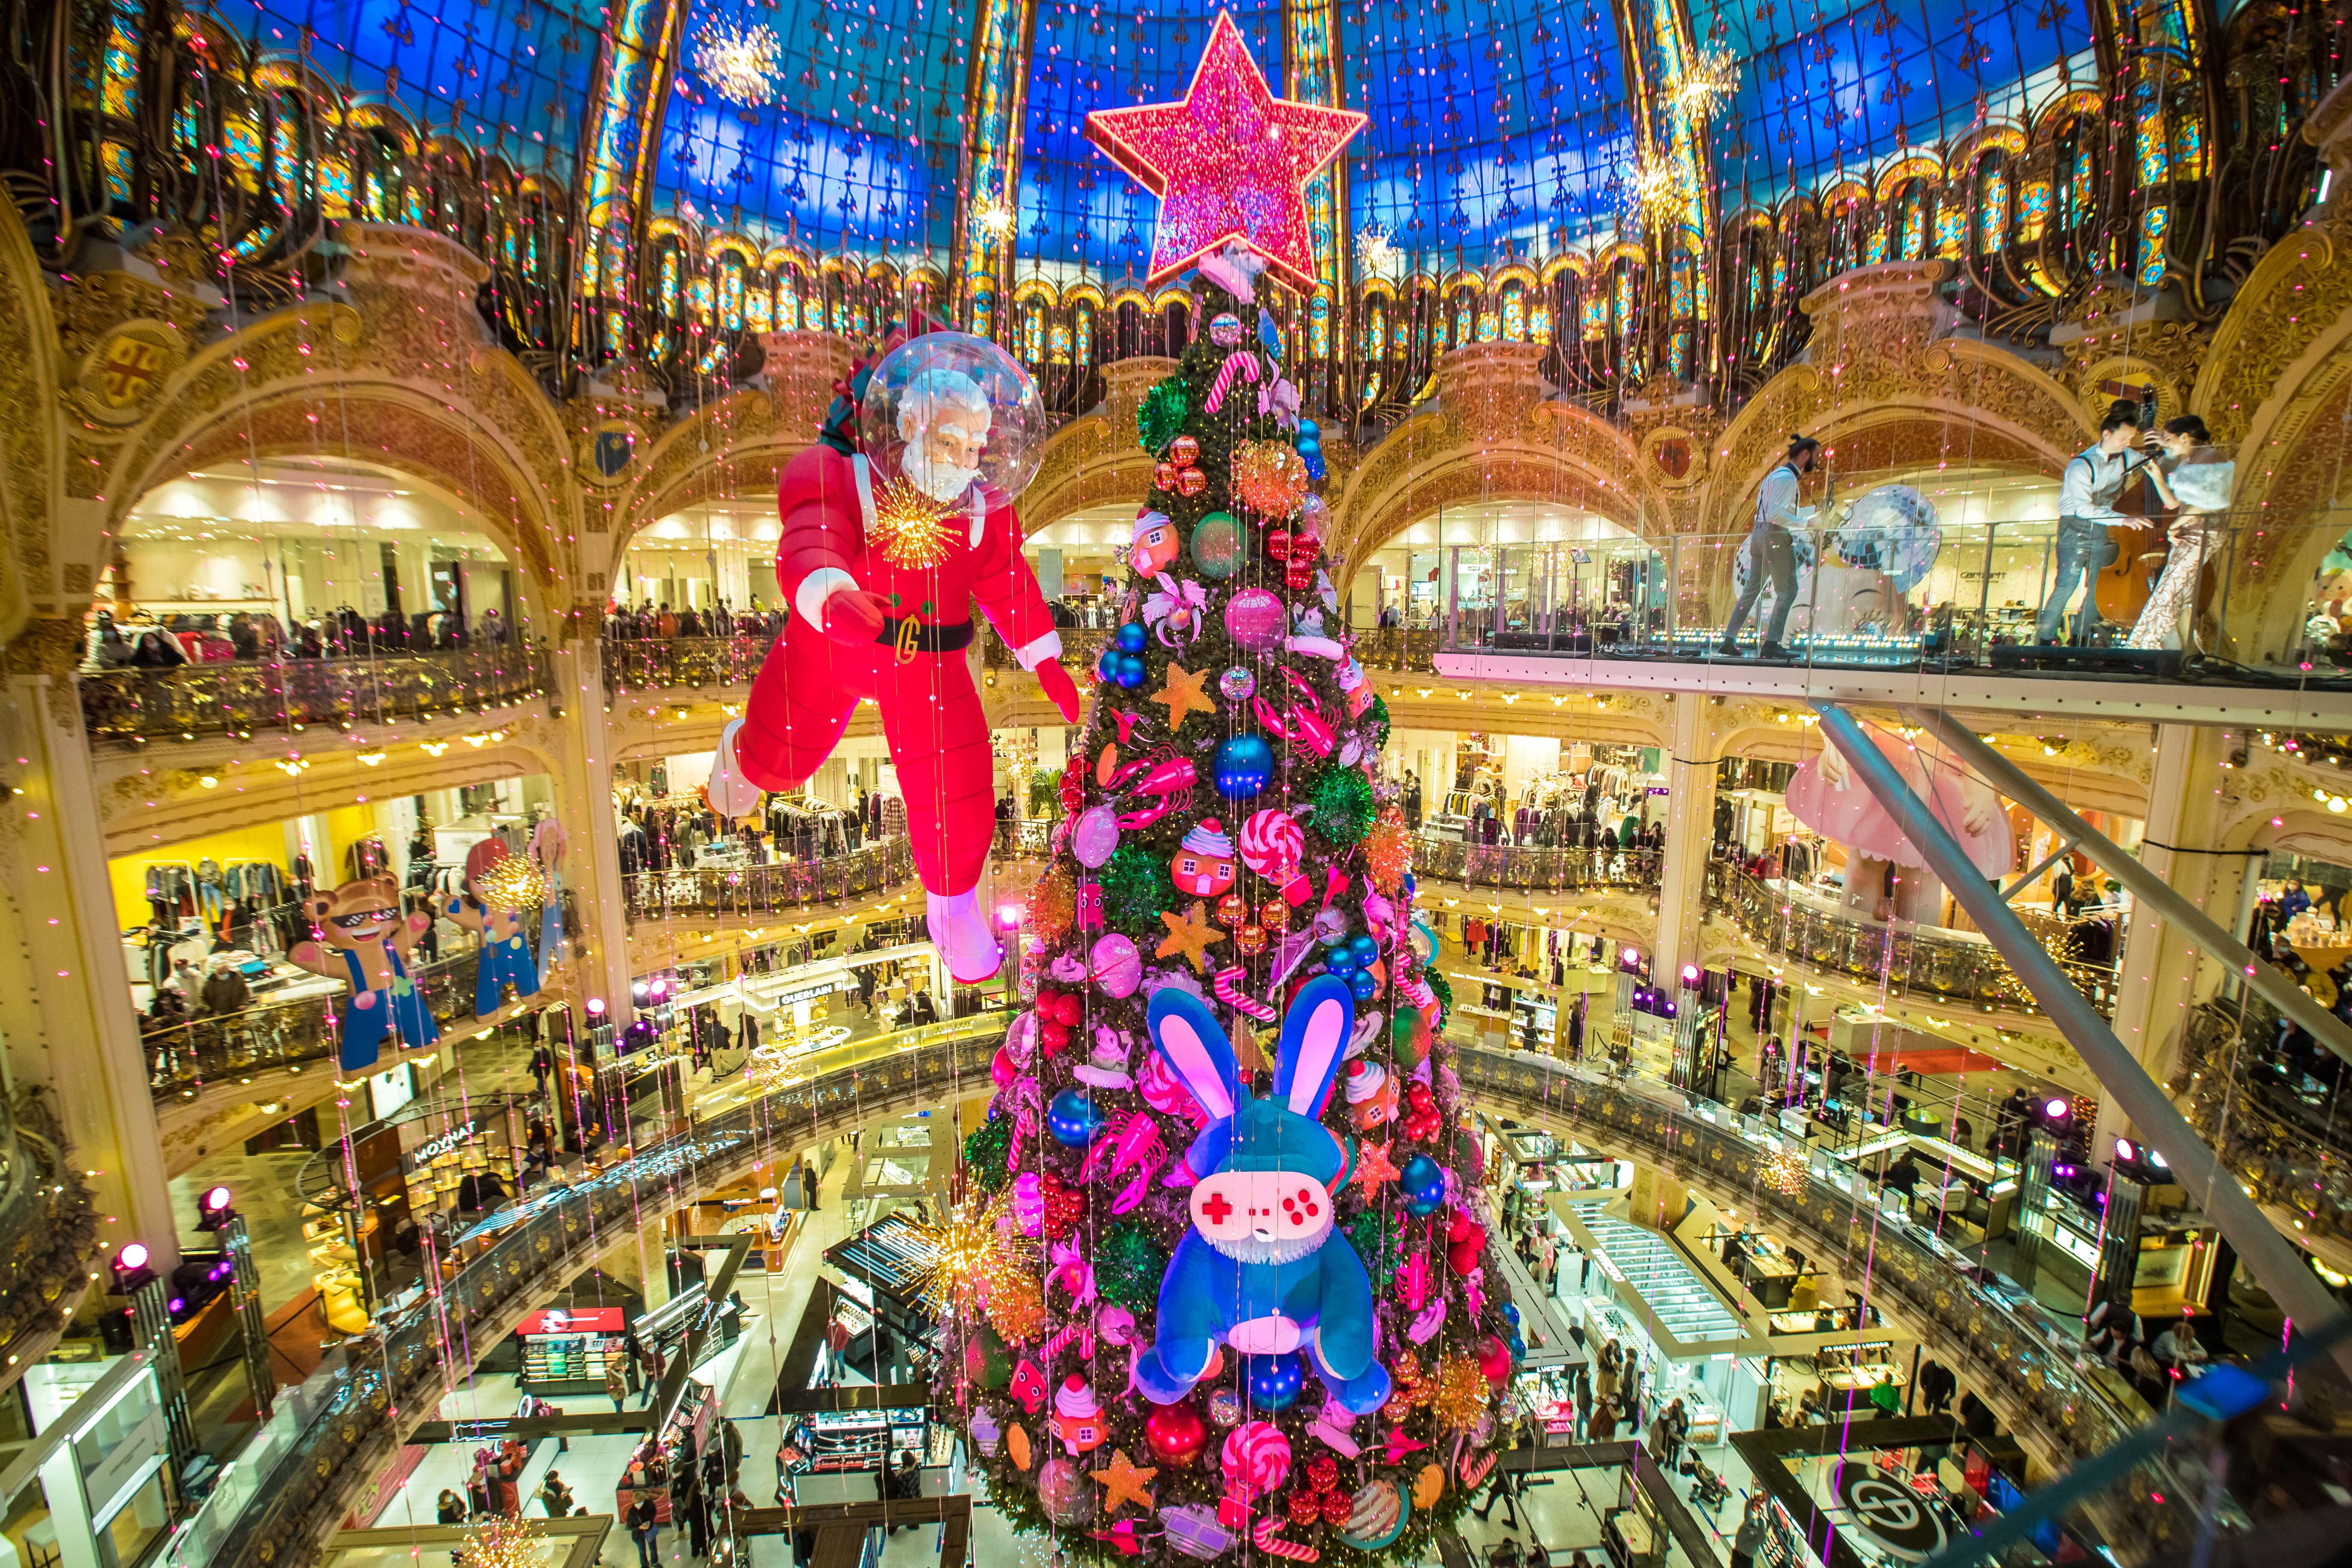 2020 Galerie Lafayette's Christmas tree will look like this ! And it's  wonderful.